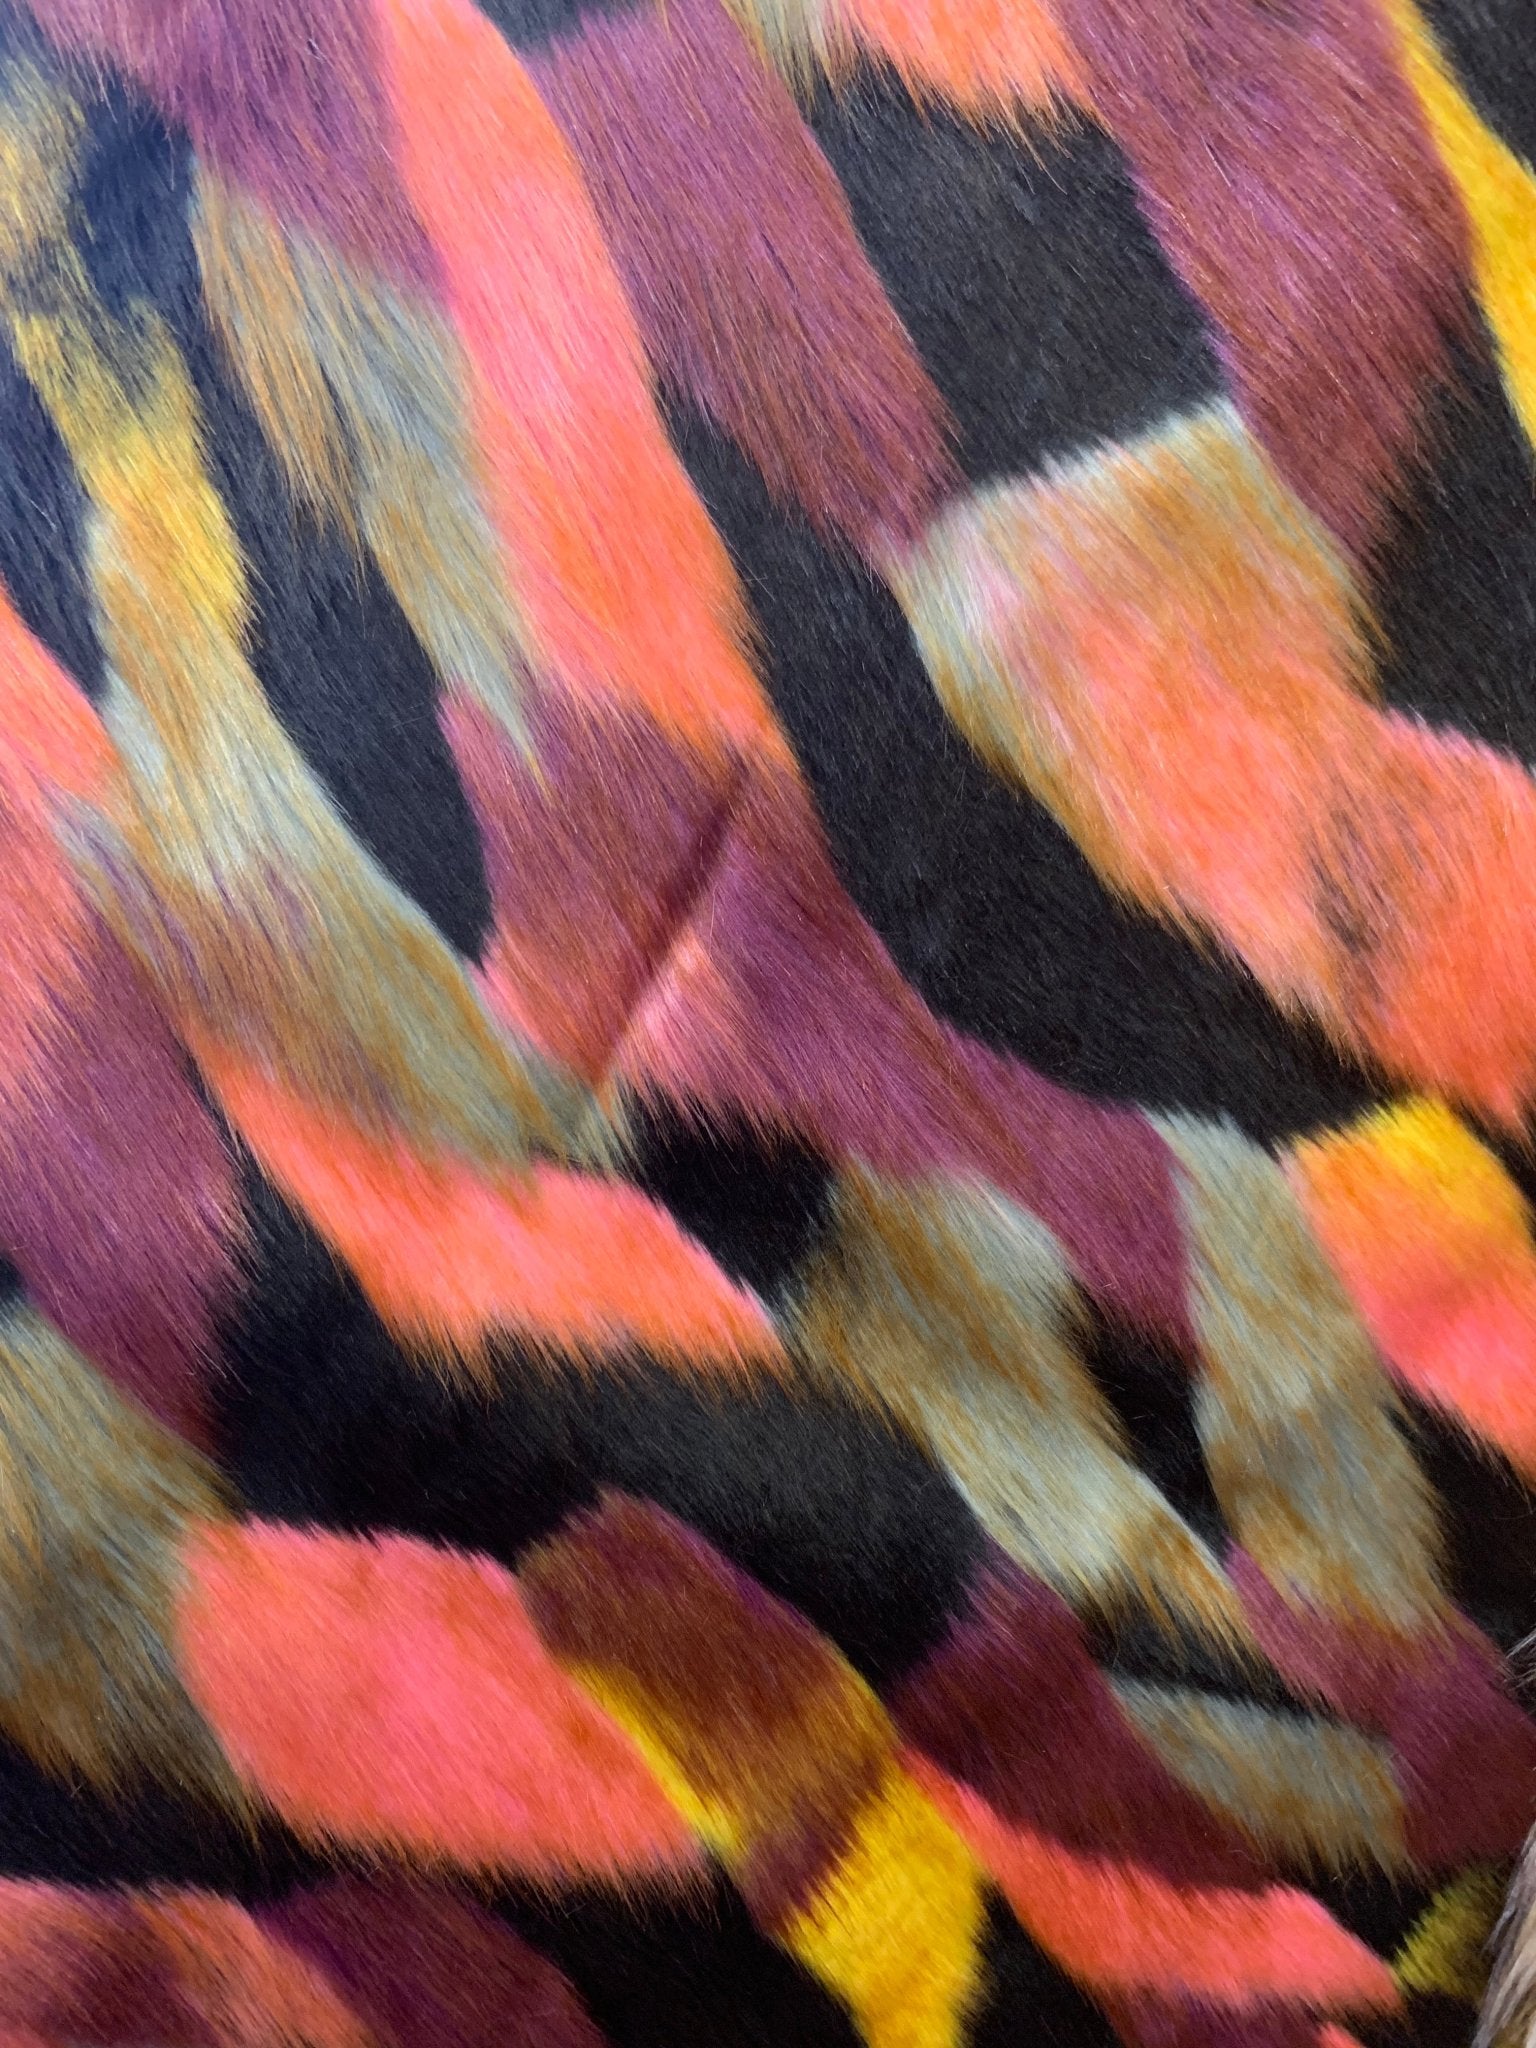 Multi-Color Animal Fake Faux Fur Fabric By The YardICEFABRICICE FABRICSBlack Yellow CoralBy The Yard (60 inches Wide)Multi-Color Animal Fake Faux Fur Fabric By The Yard ICEFABRIC Black Yellow Coral